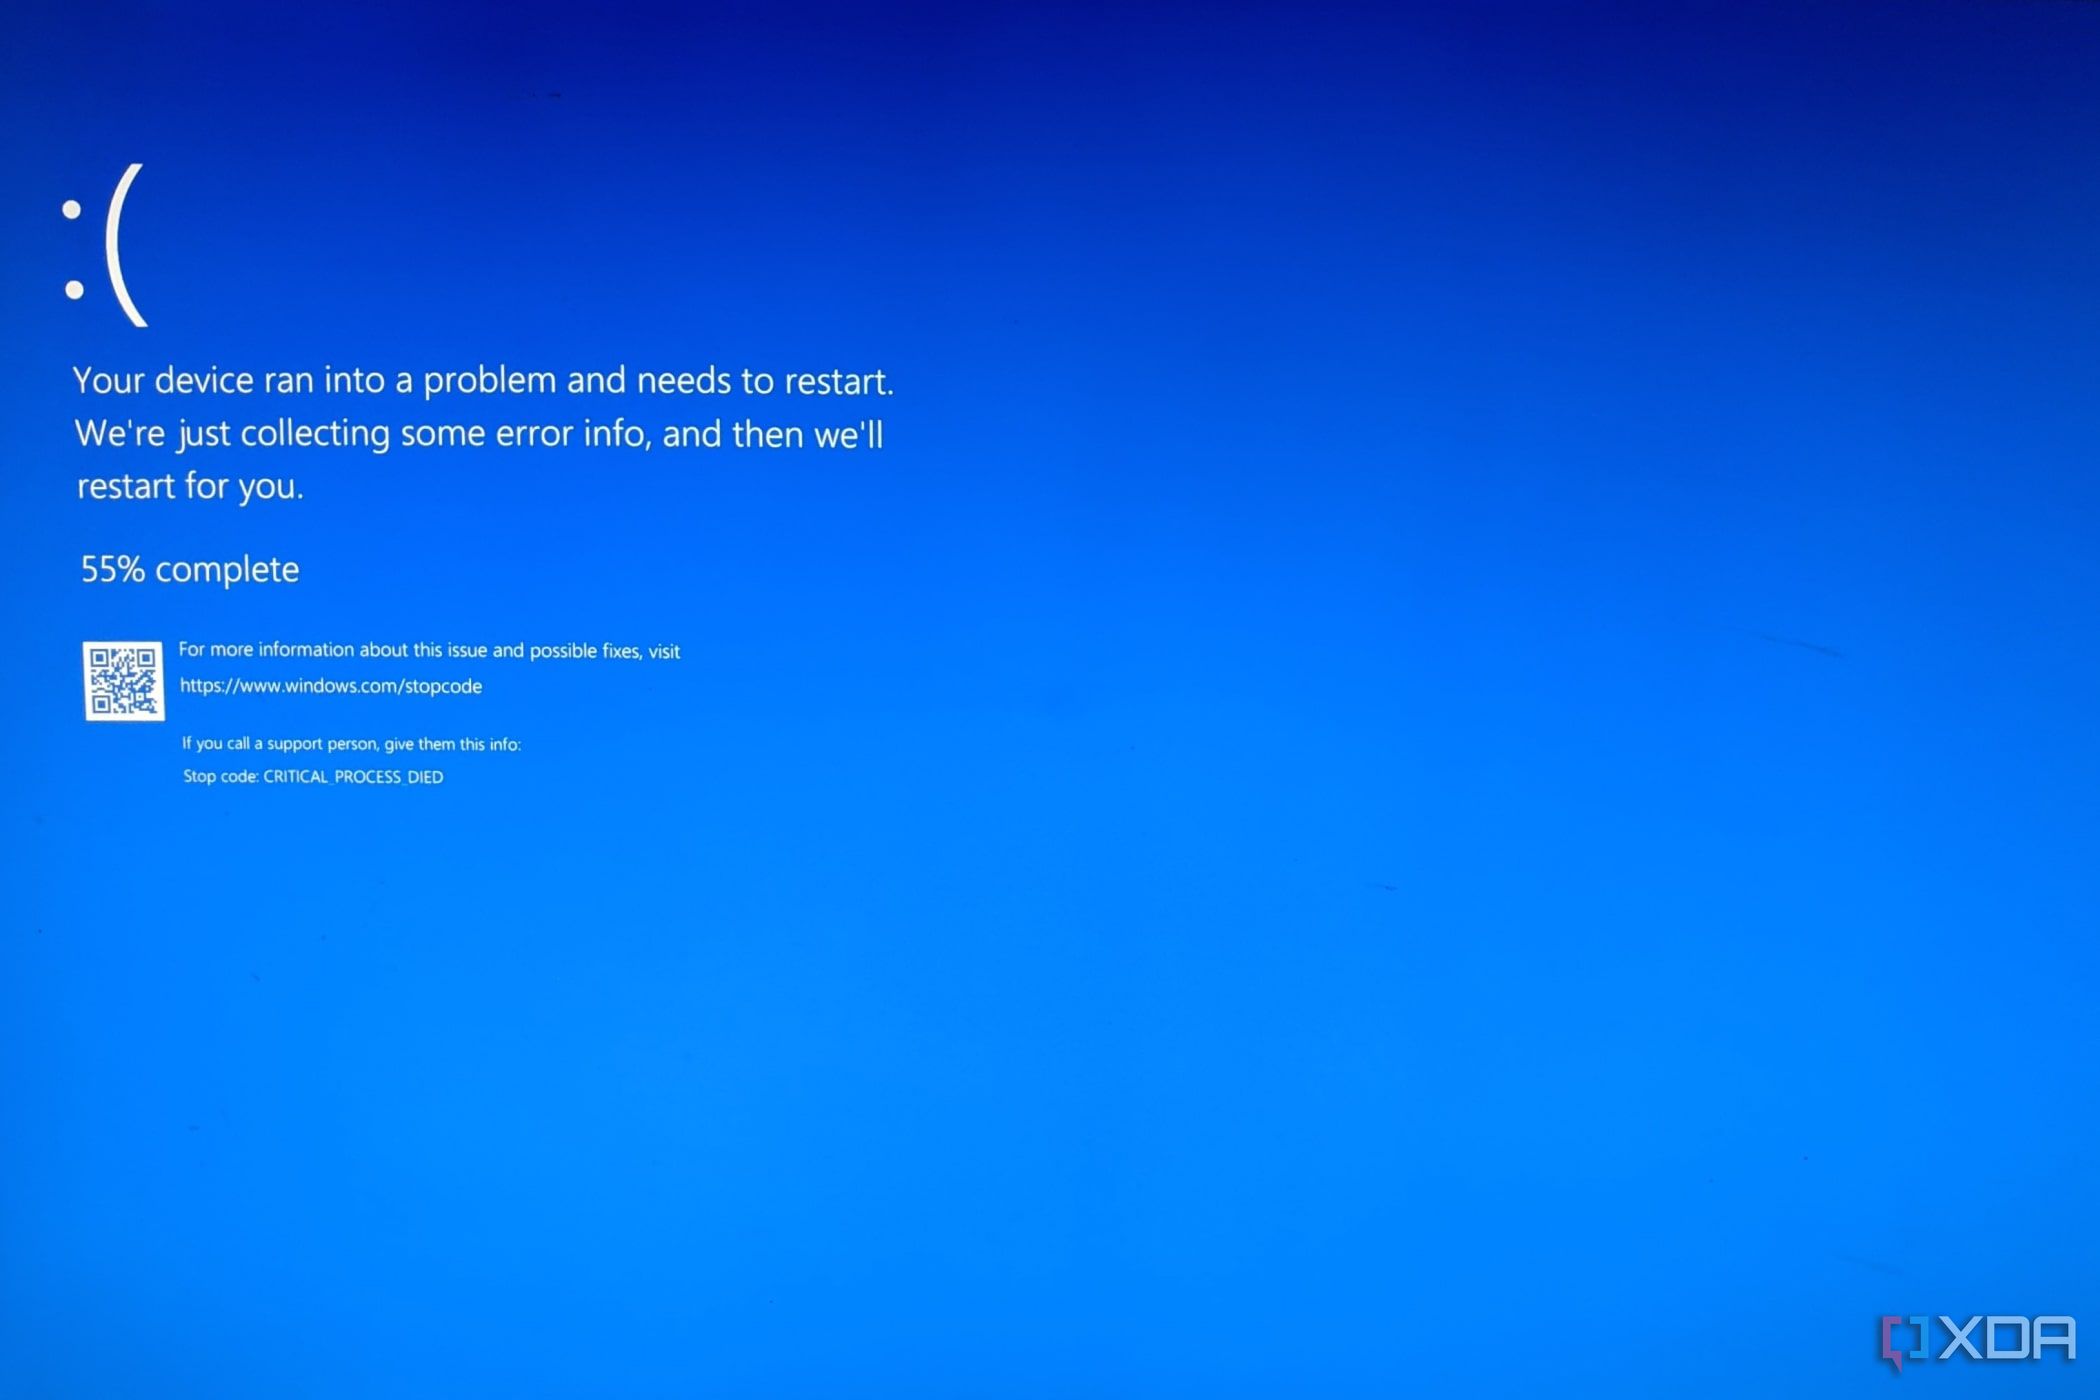 A BSOD caused by running WININIT command in Windows Terminal